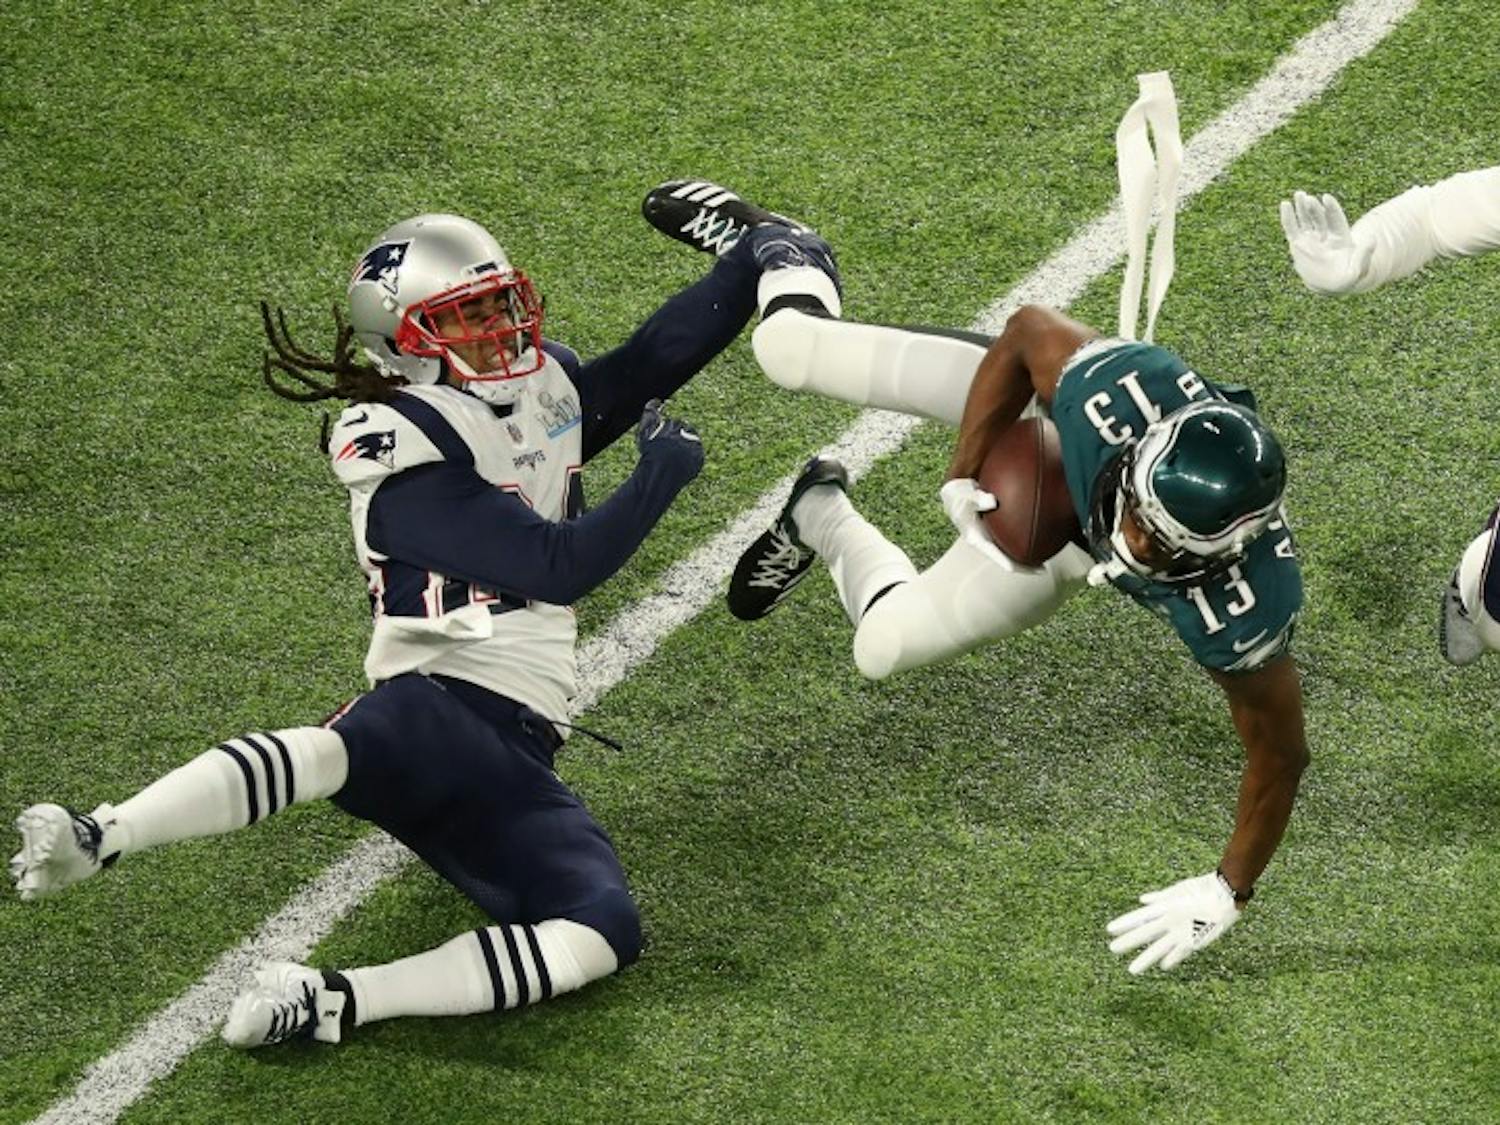 Philadelphia Eagles wide receiver Nelson Agholor (13) falls forward during the Eagles' first drive as Stephon Gilmore, left, and Kyle Van Noy defend in Super Bowl LII on Sunday, Feb. 4, 2018 in Minneapolis, Minn. (Elizabeth Flores/Minneapolis Star Tribune/TNS) 